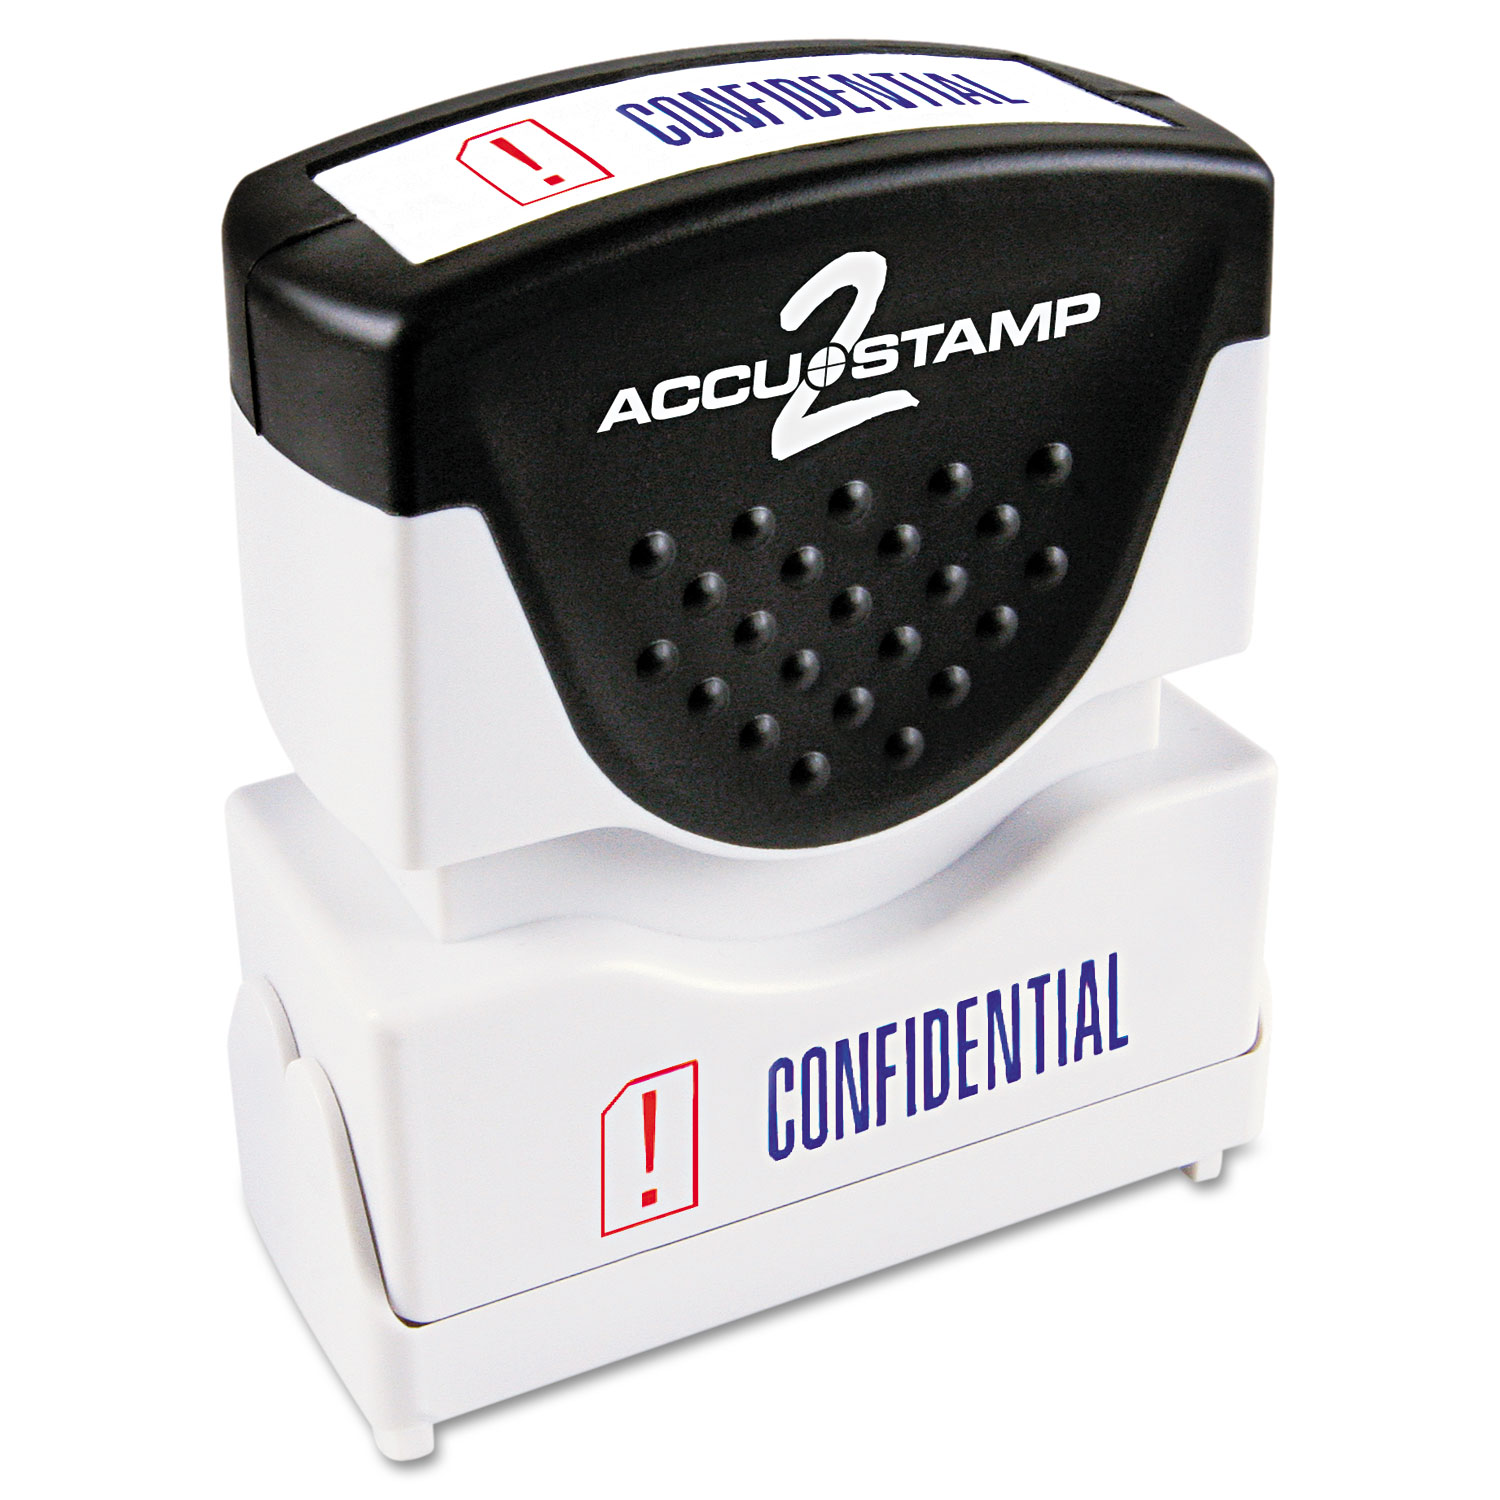  ACCUSTAMP2 035536 Pre-Inked Shutter Stamp, Red/Blue, CONFIDENTIAL, 1 5/8 x 1/2 (COS035536) 